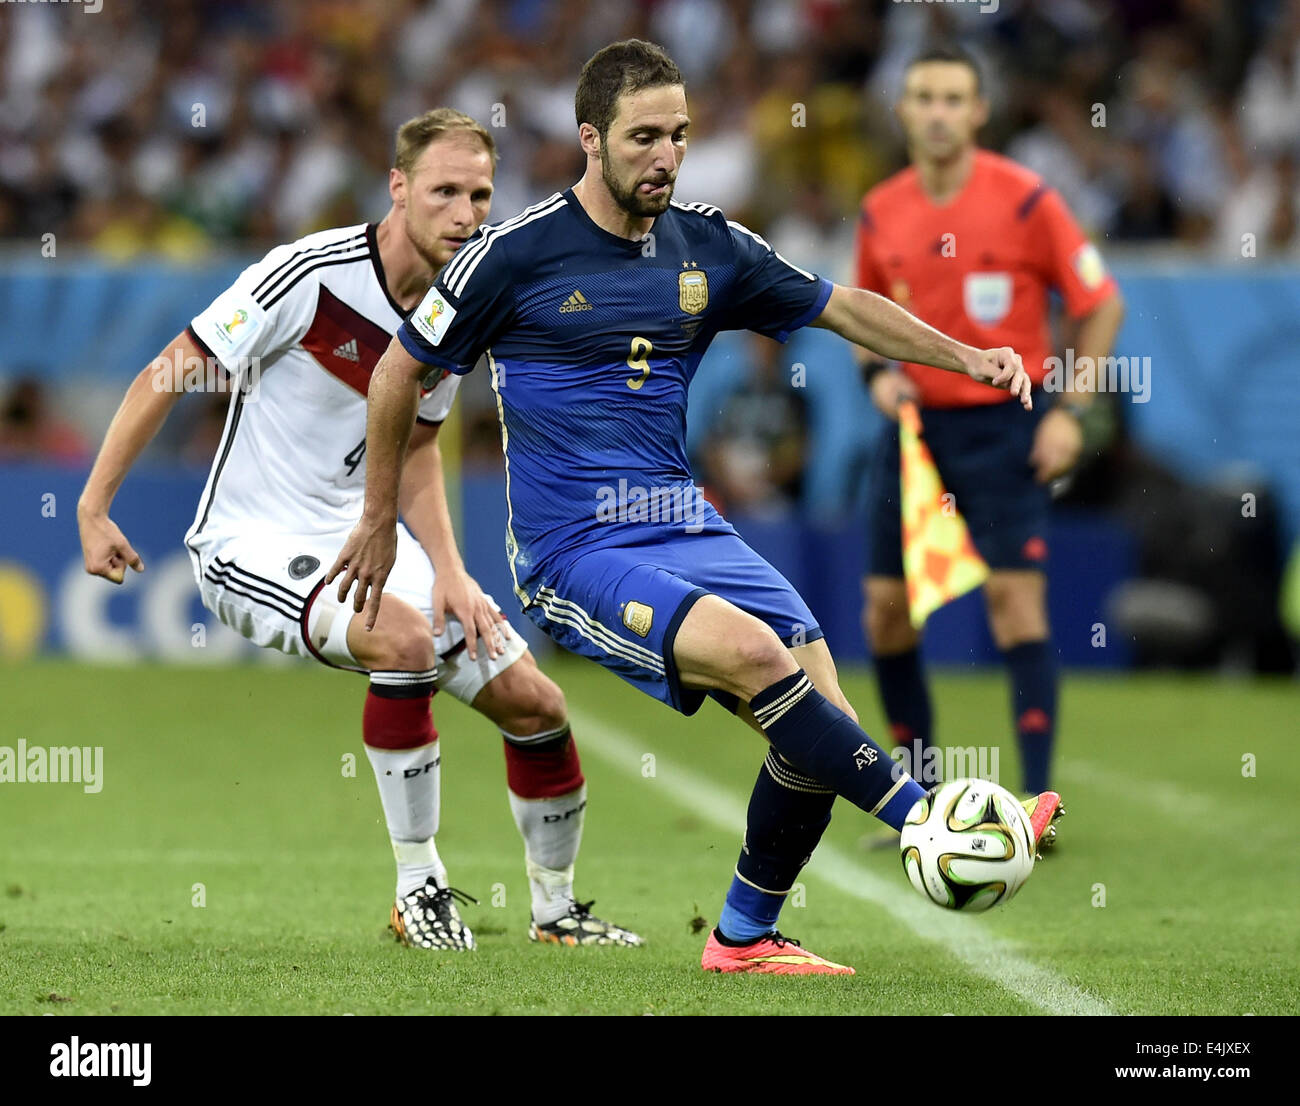 Rio De Janeiro, Brazil. 13th July, 2014. Argentina's Gonzalo Higuain (front) controls the ball during the final match between Germany and Argentina of 2014 FIFA World Cup at the Estadio do Maracana Stadium in Rio de Janeiro, Brazil, on July 13, 2014. Credit:  Qi Heng/Xinhua/Alamy Live News Stock Photo